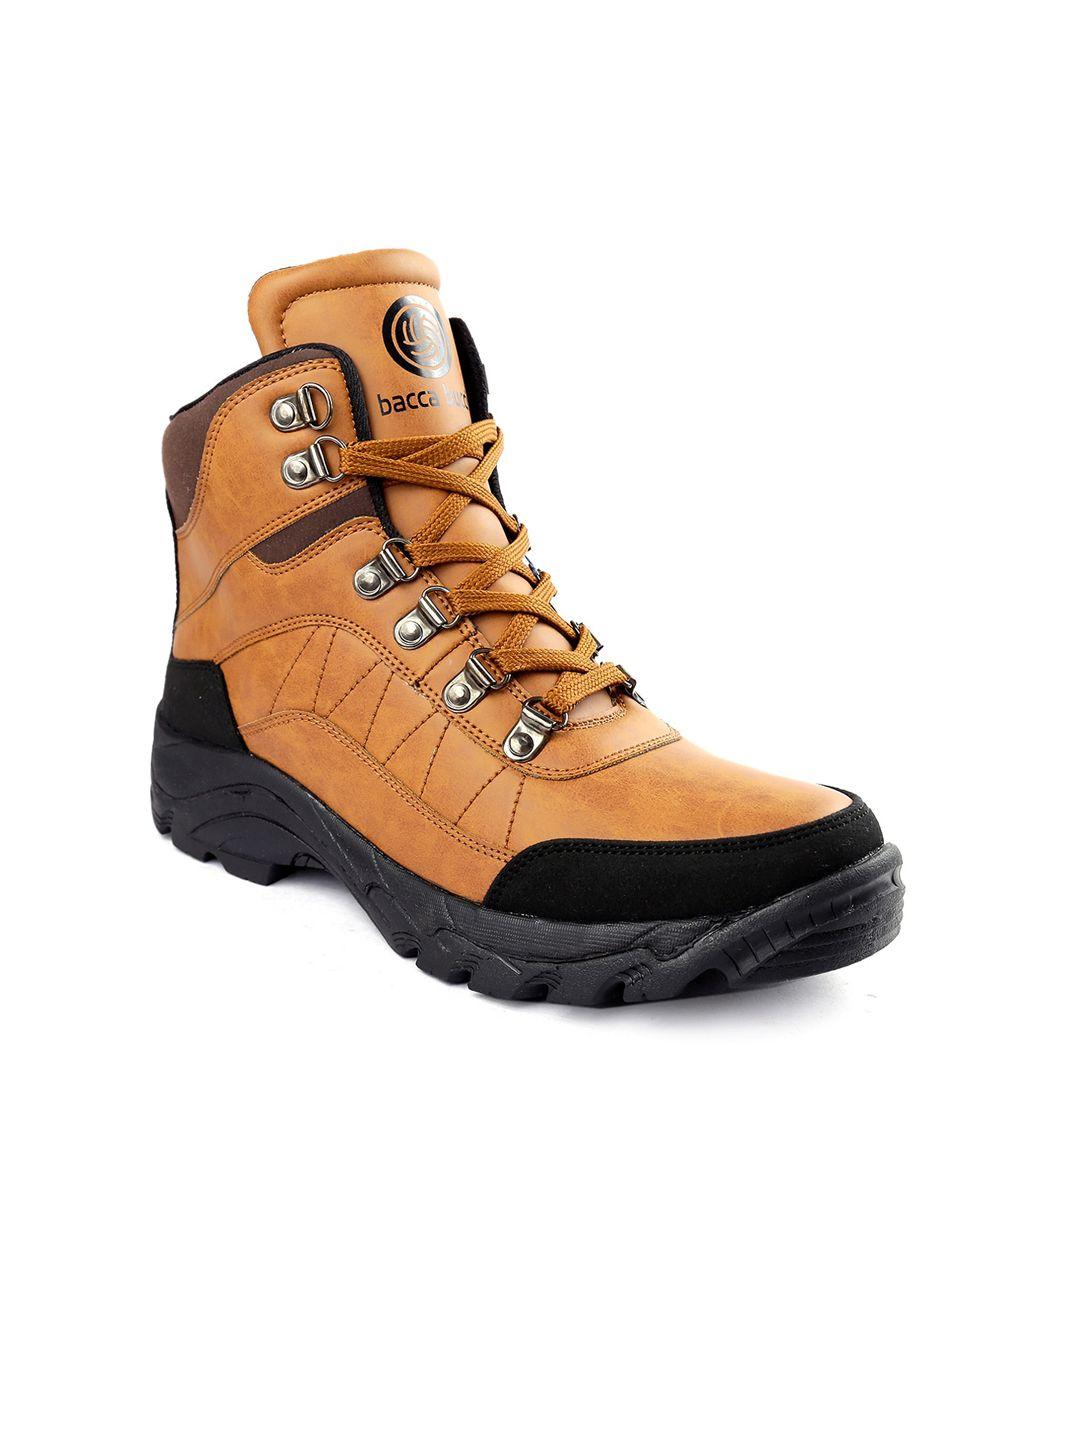 bacca bucci men mid-top hiking boots